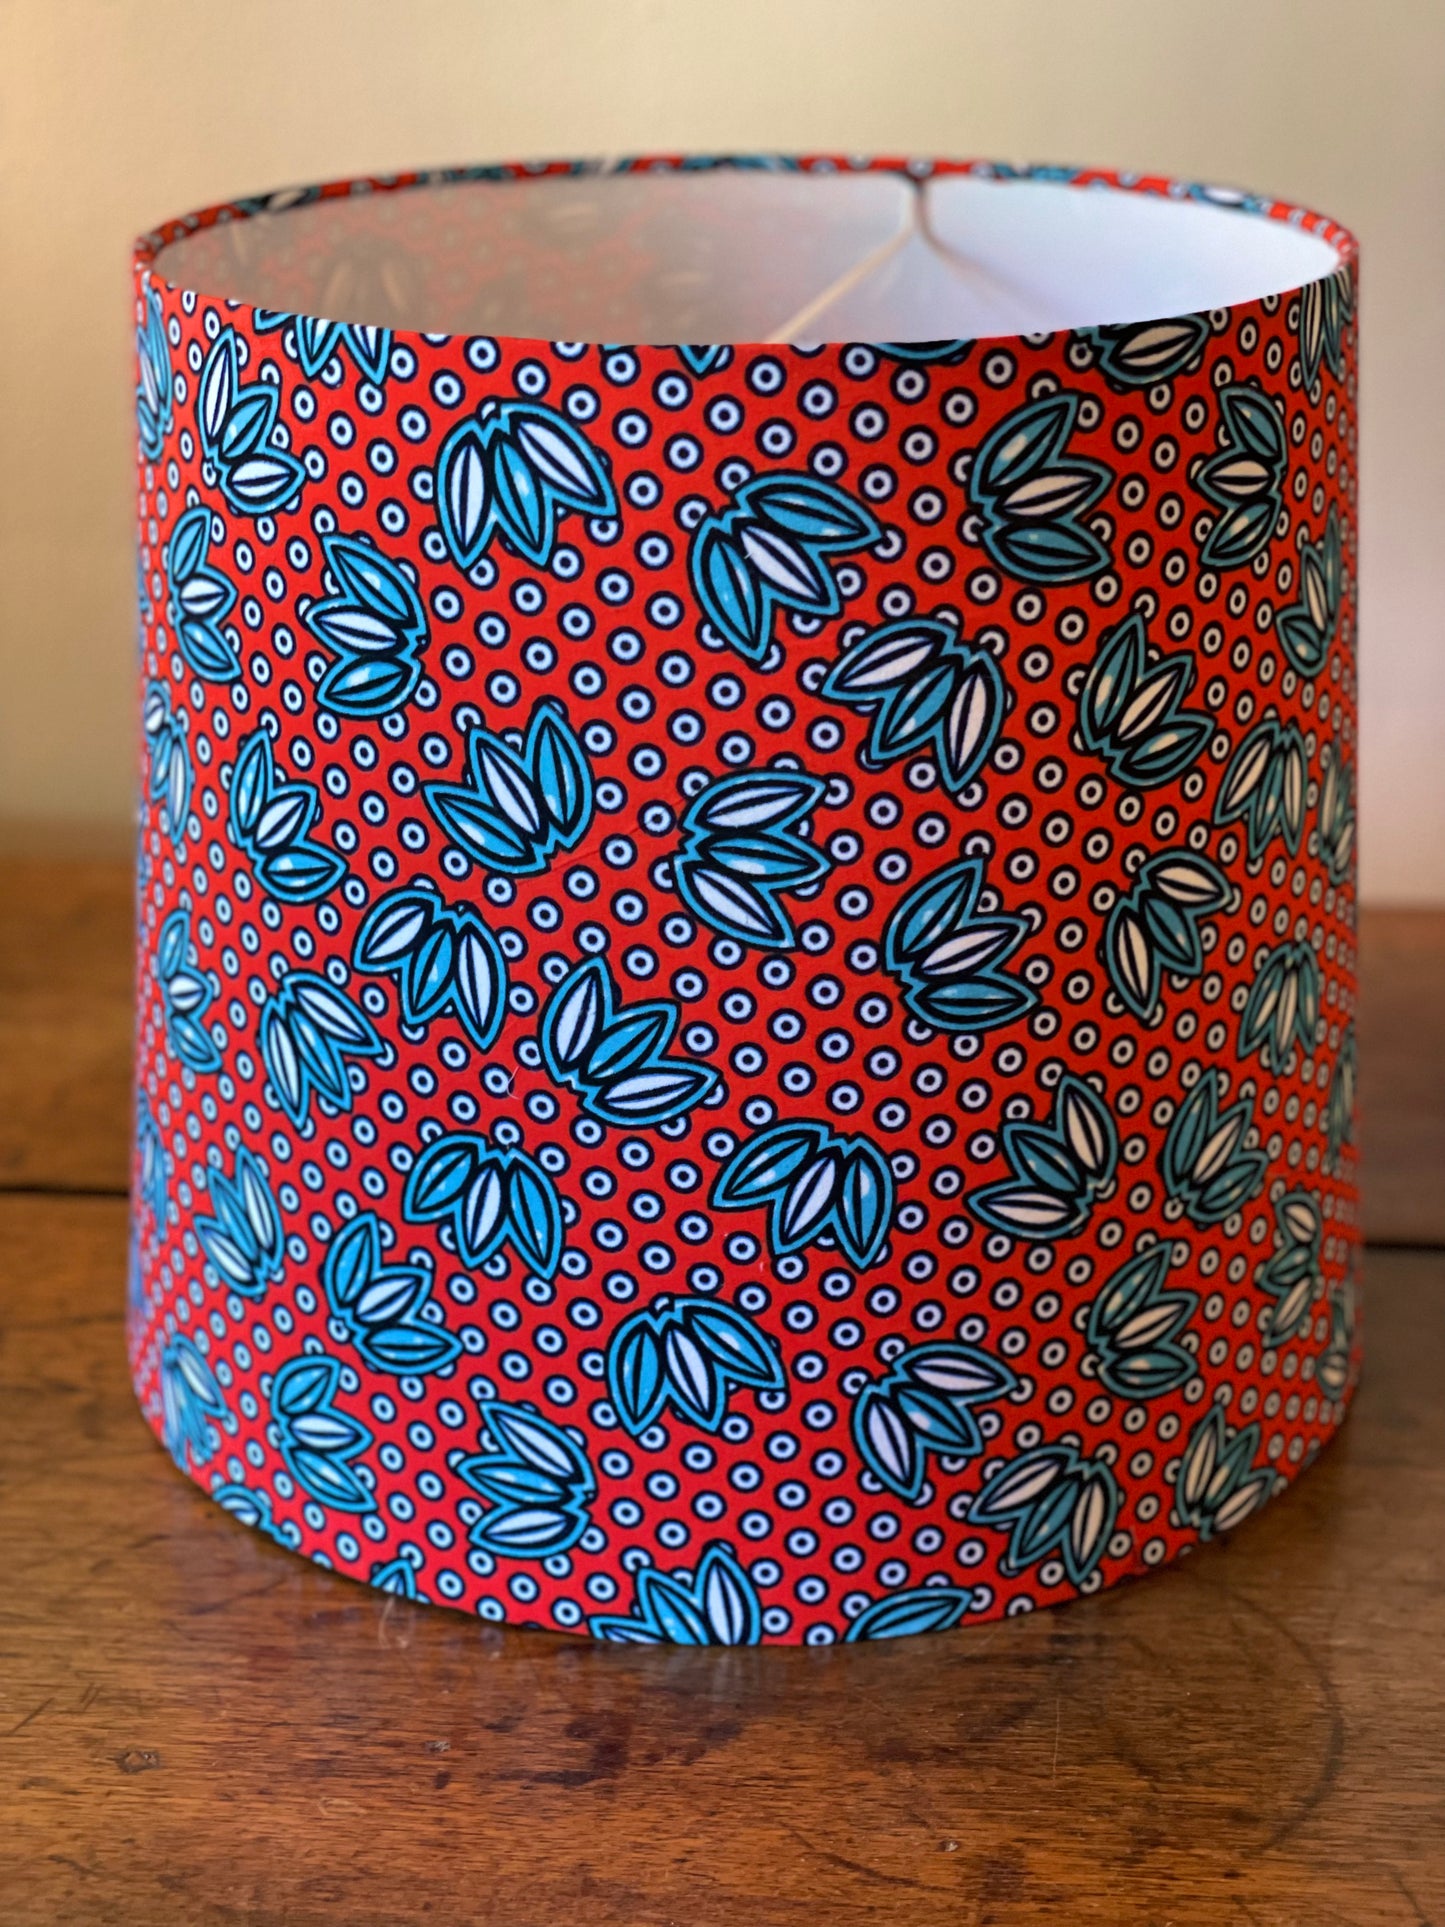 Large Empire Shade. 11.75 x 13.75 x 11.75. West African Ankara Fabric. Bright Red with Blue and White Floral and Circular Detail.